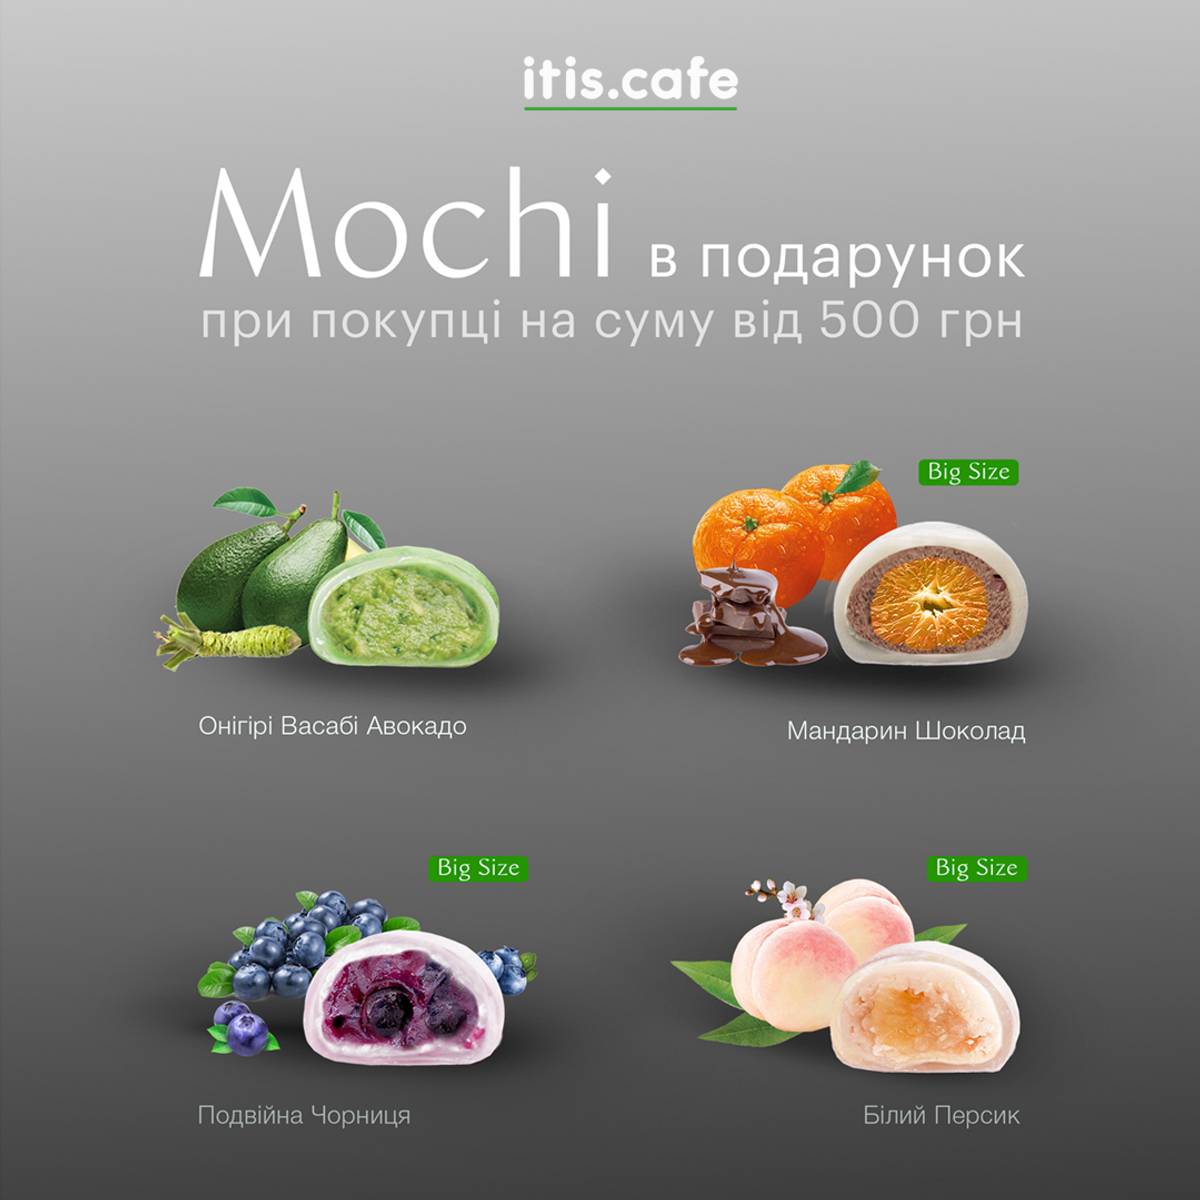 Get Mochi as a gift